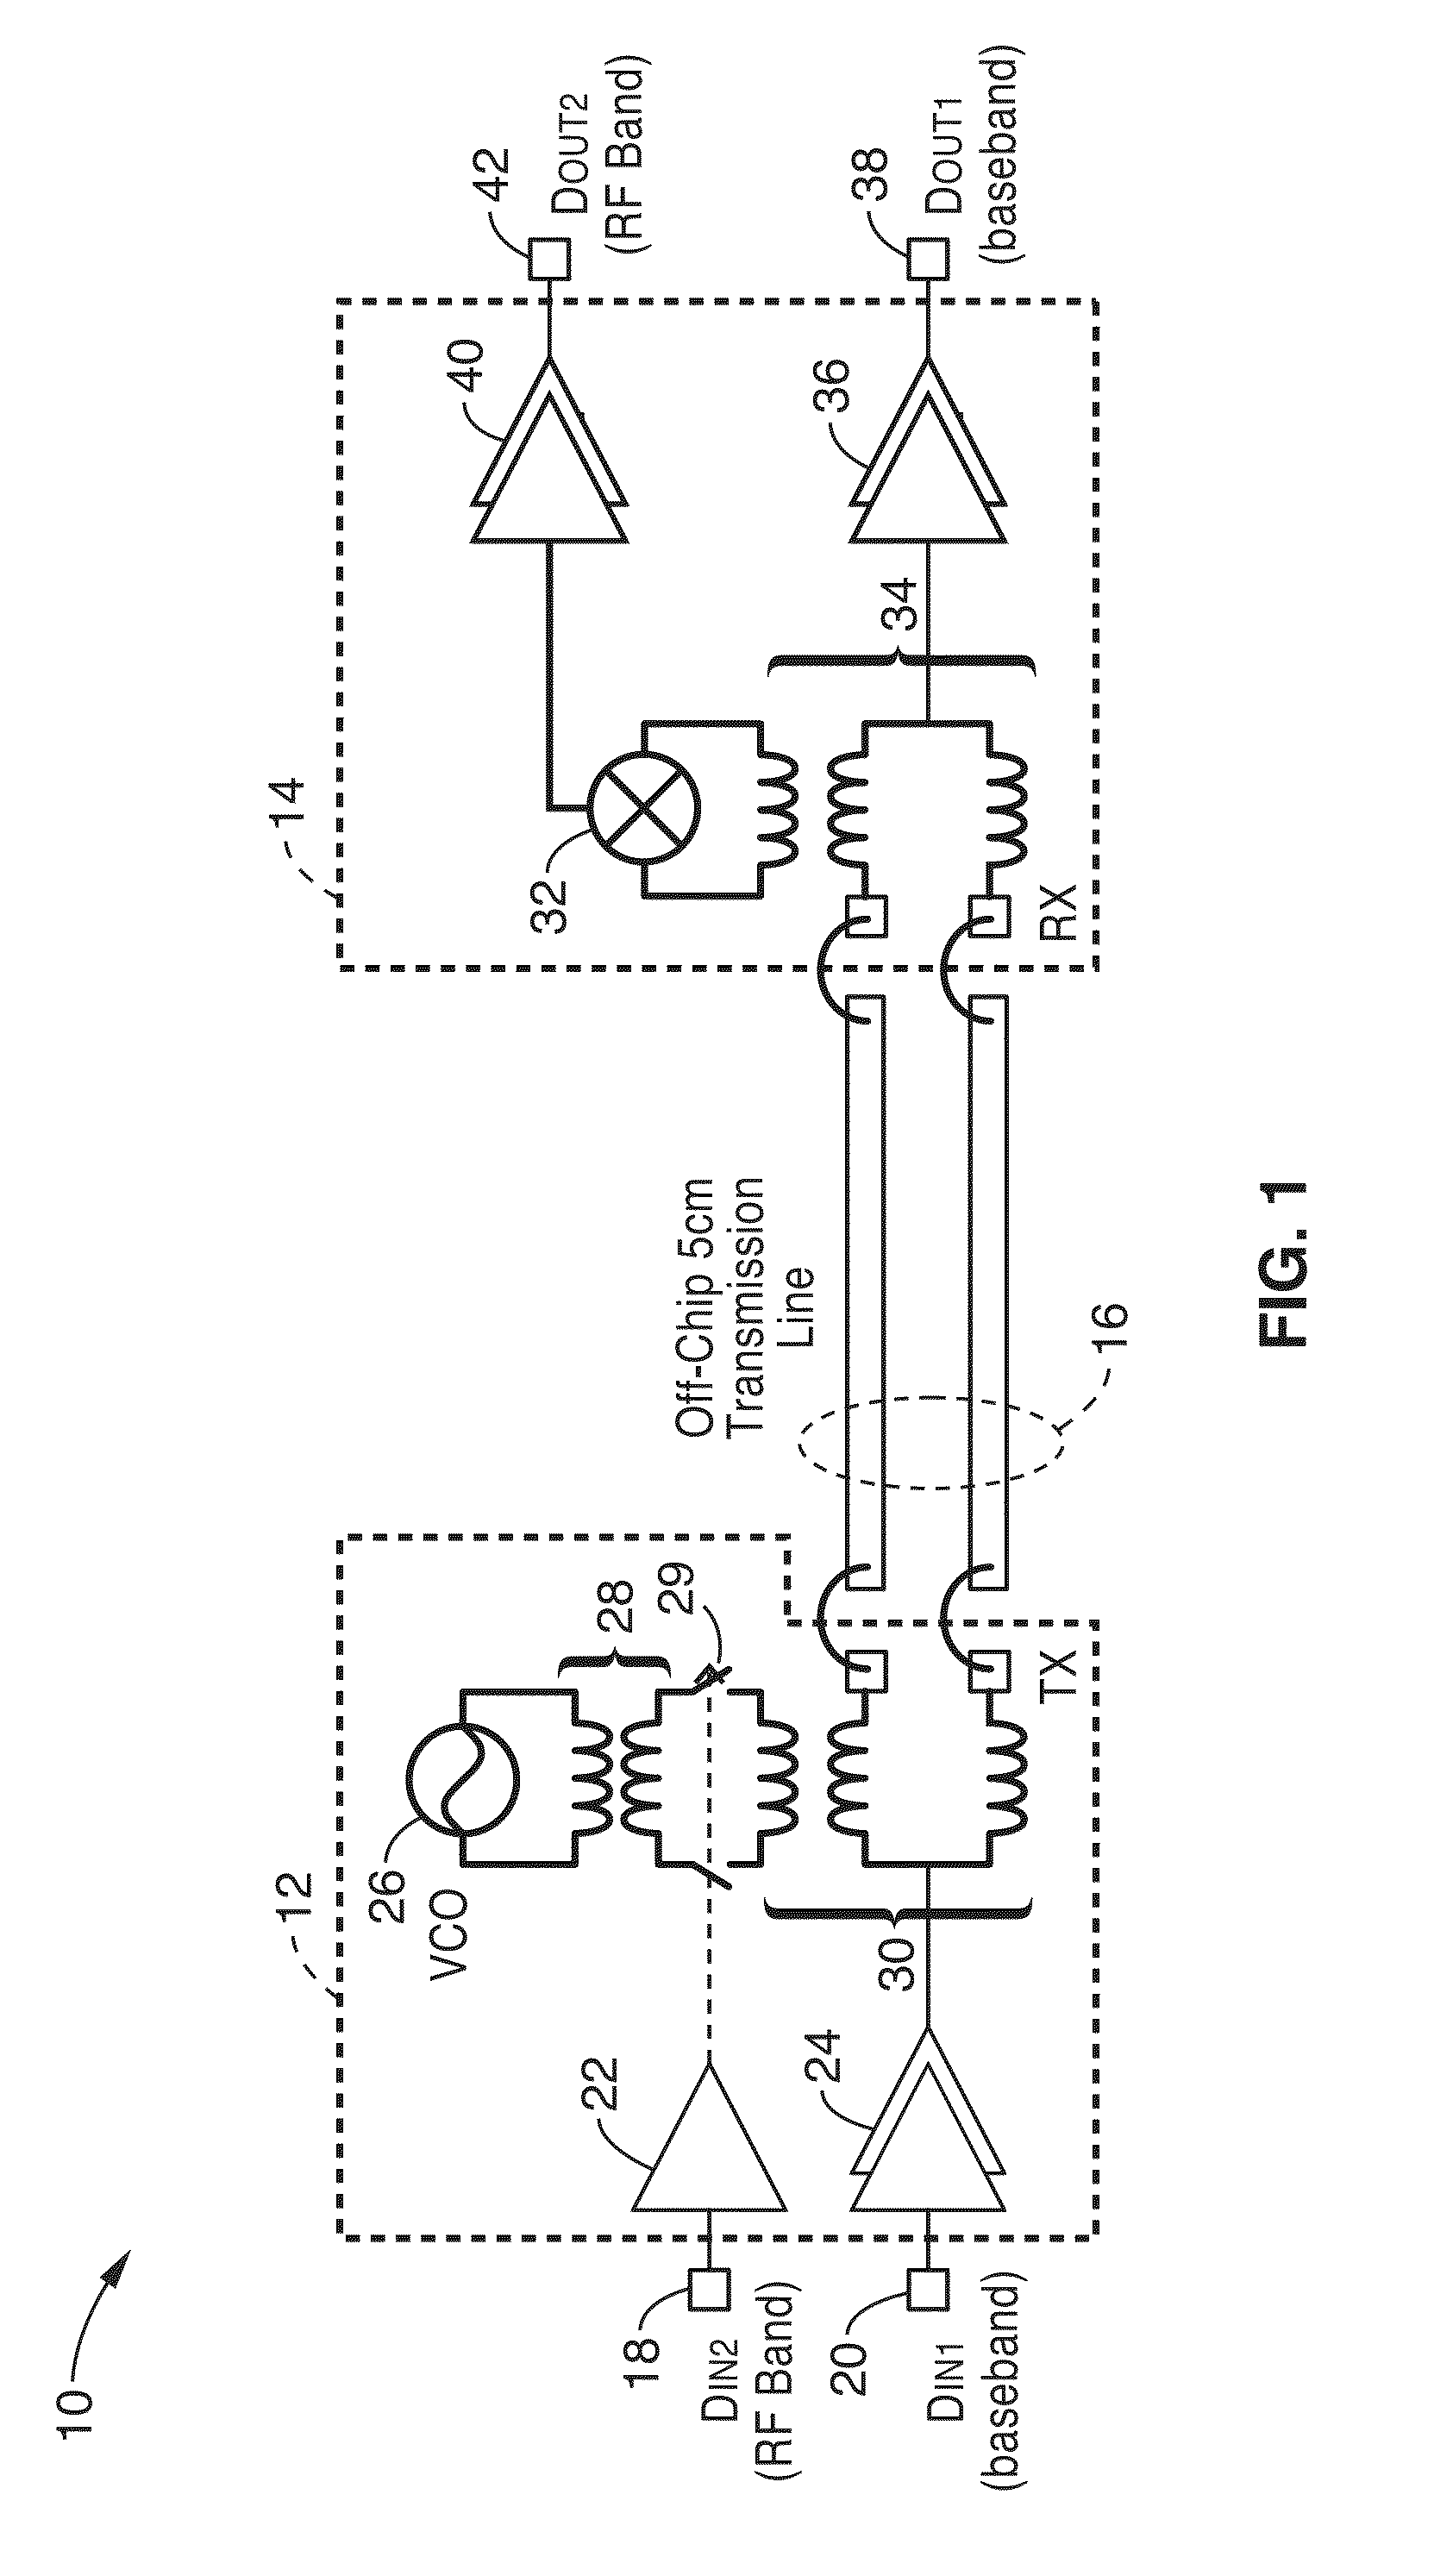 Multi-band interconnect for inter-chip and intra-chip communications